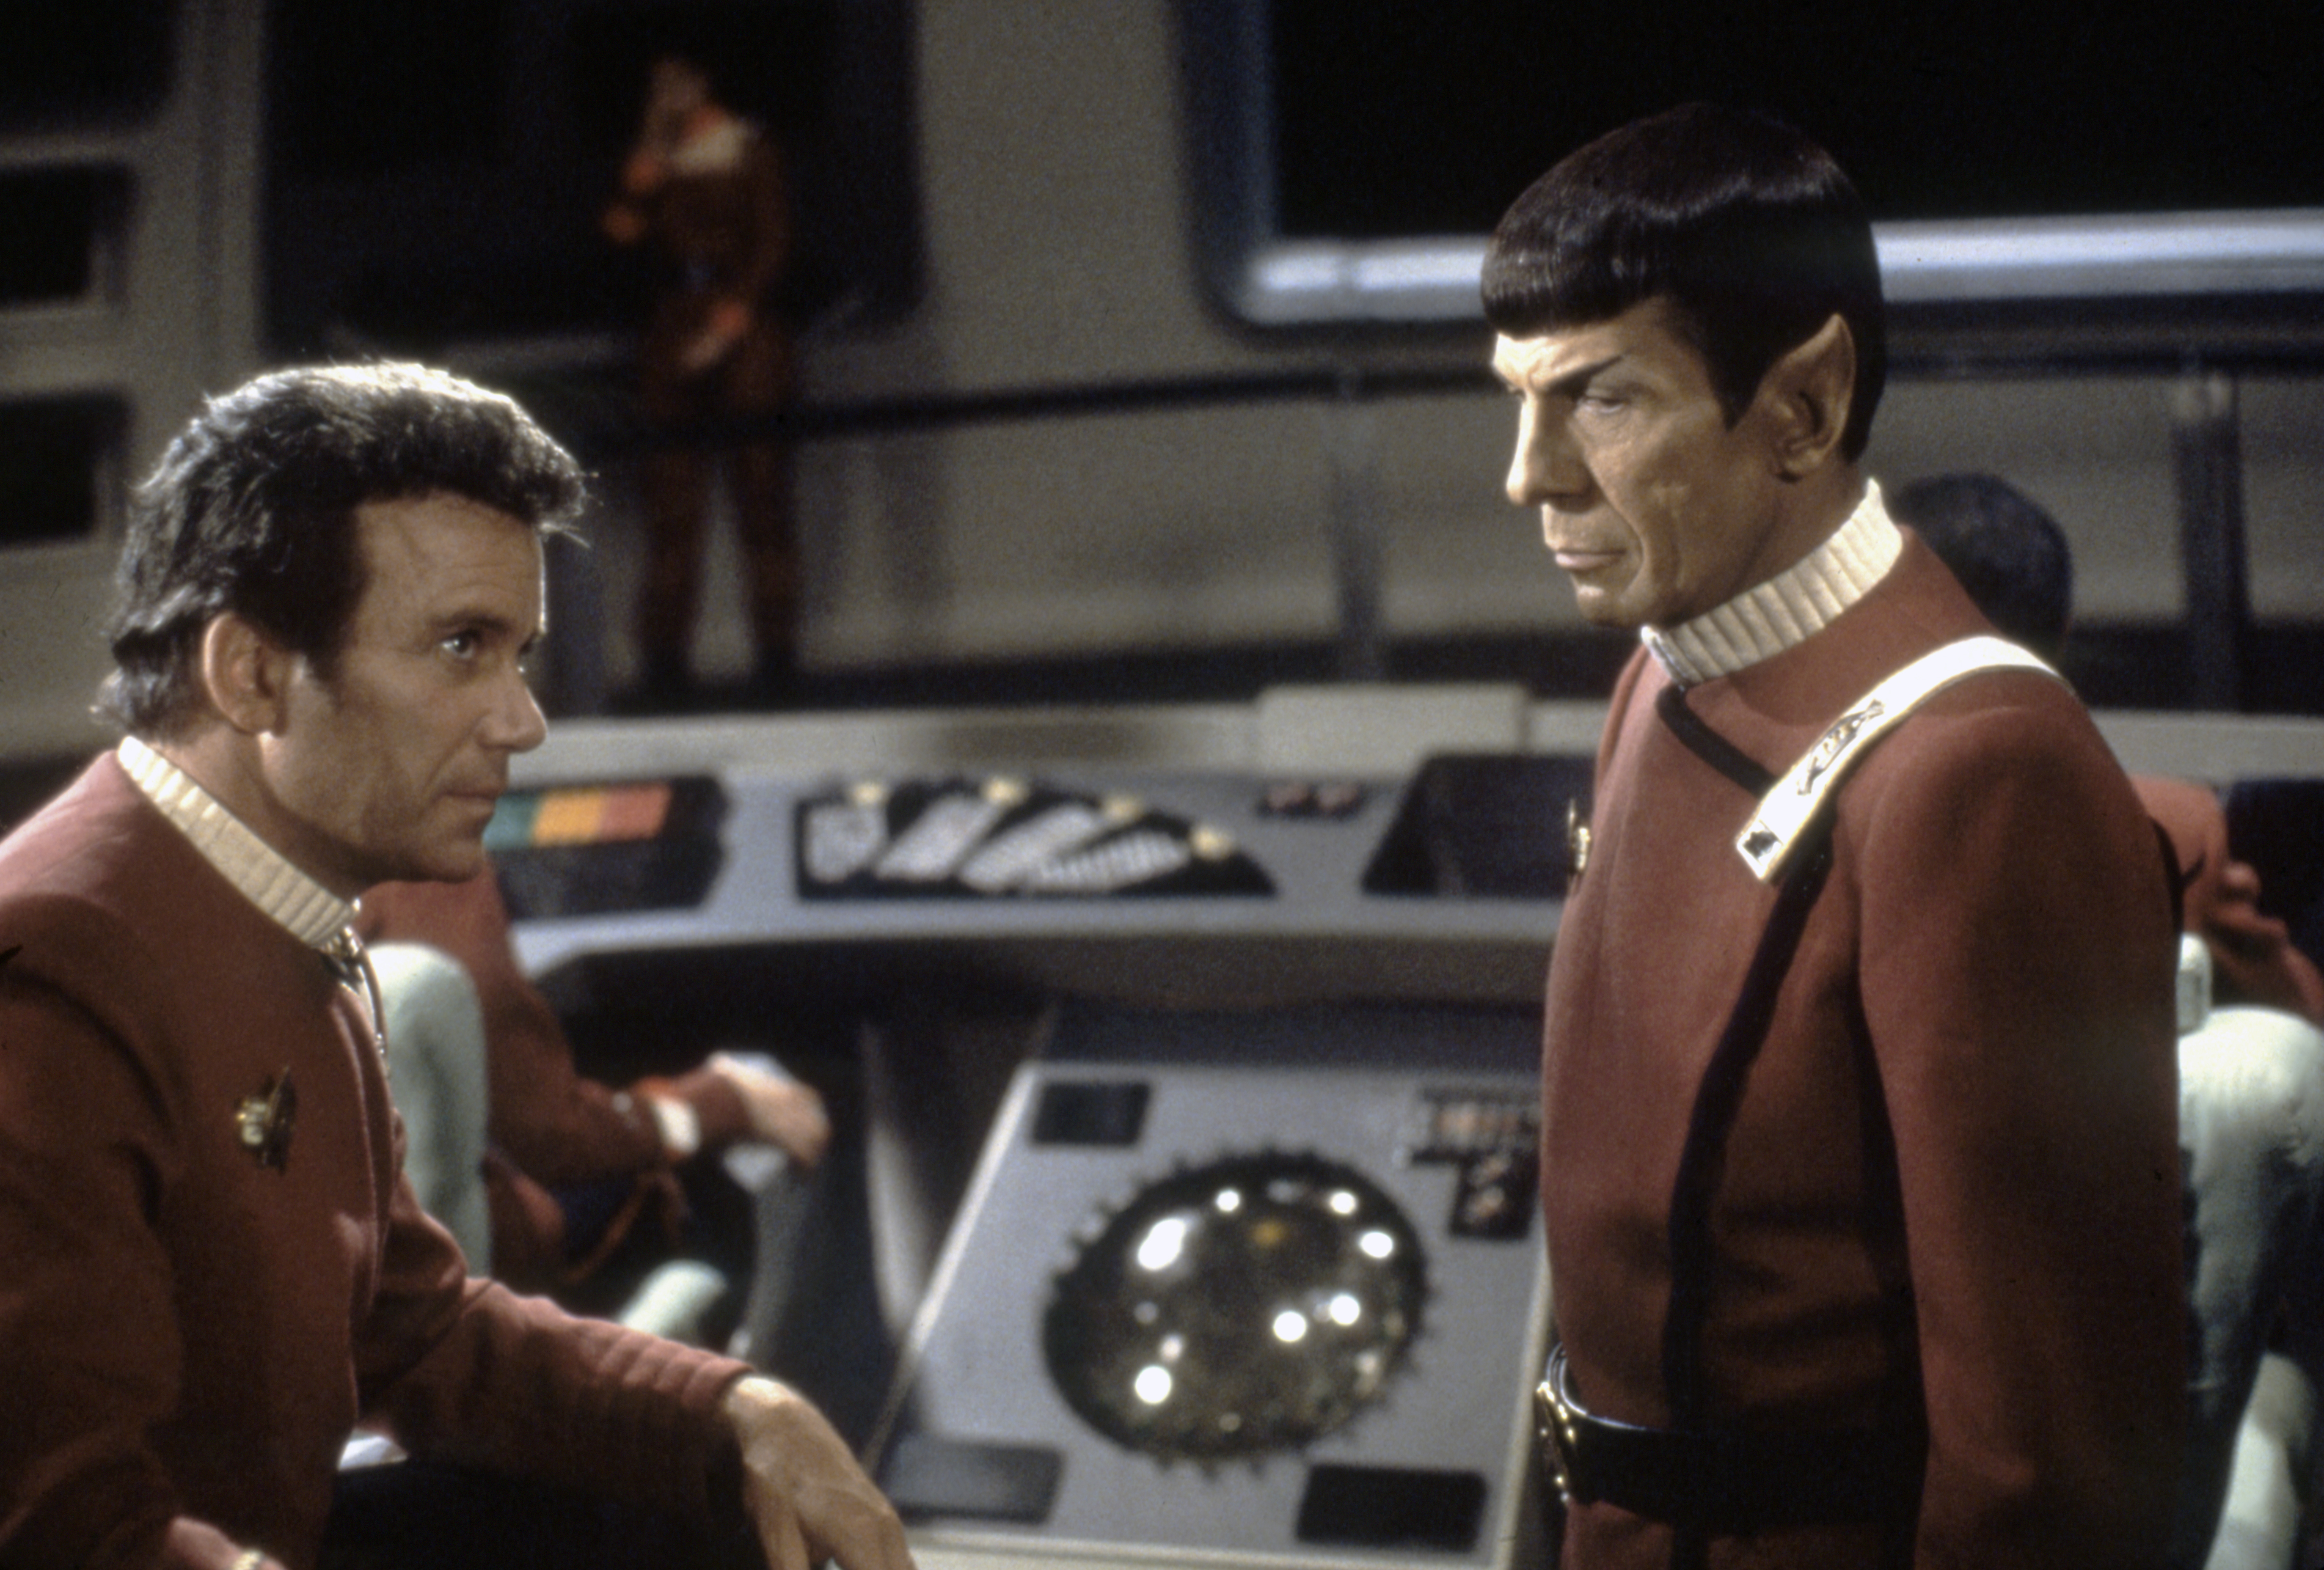 Canadian actor William Shatner and American Leonard Nimoy on the set of Star Trek: The Wrath of Khan, directed by Nicholas Meyer.